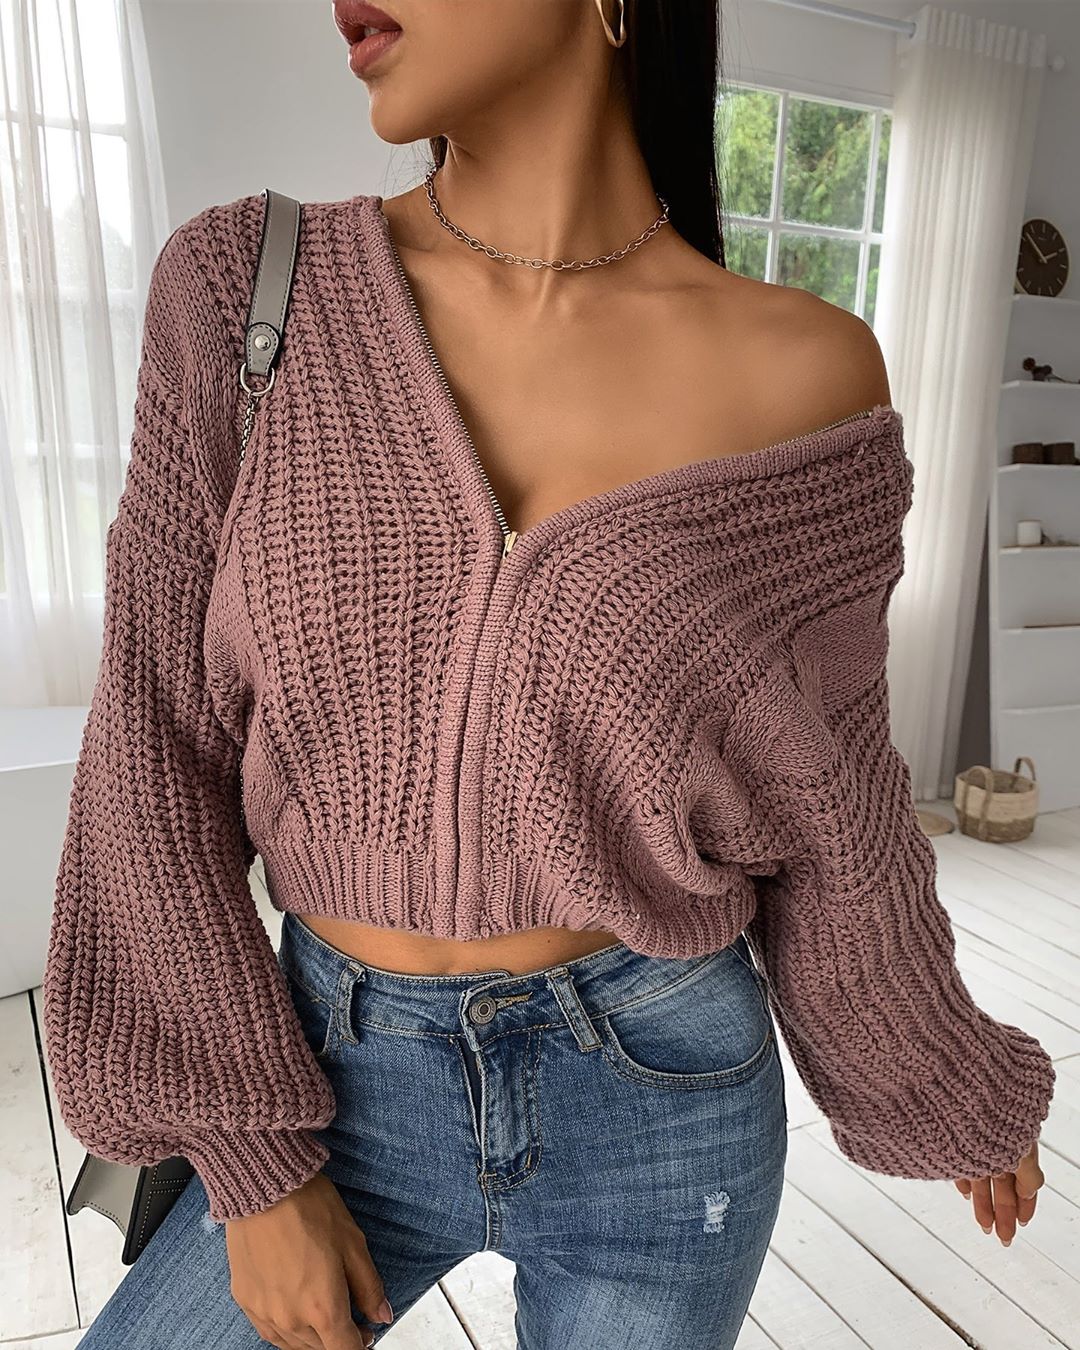 boutiquefeel_official - Rock your autumn style.⁠
🔍SKU：LZD1862⁠
Shop:boutiquefeel.com⁠
 #fashion #style #sweaterweather